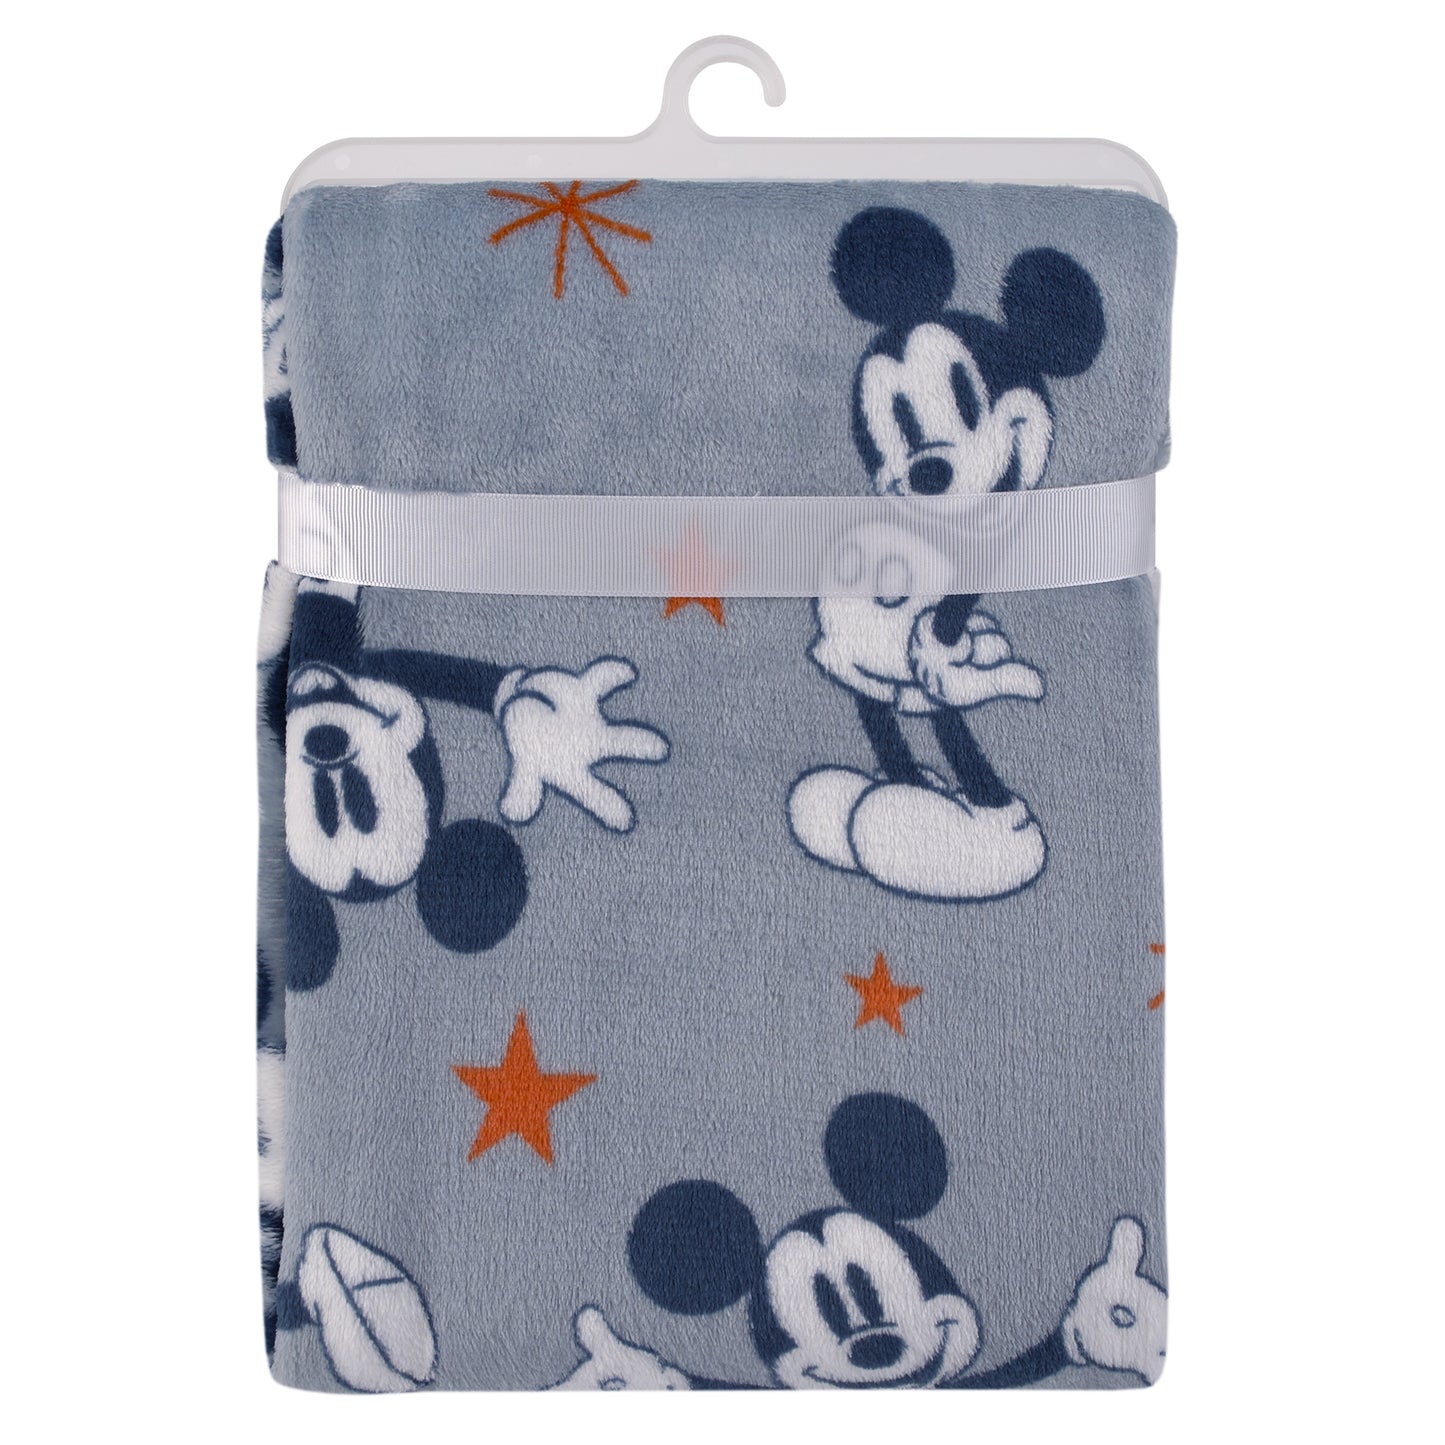 Disney Mickey Mouse Gray, Navy, White and Red Stars Super Soft Baby Blanket